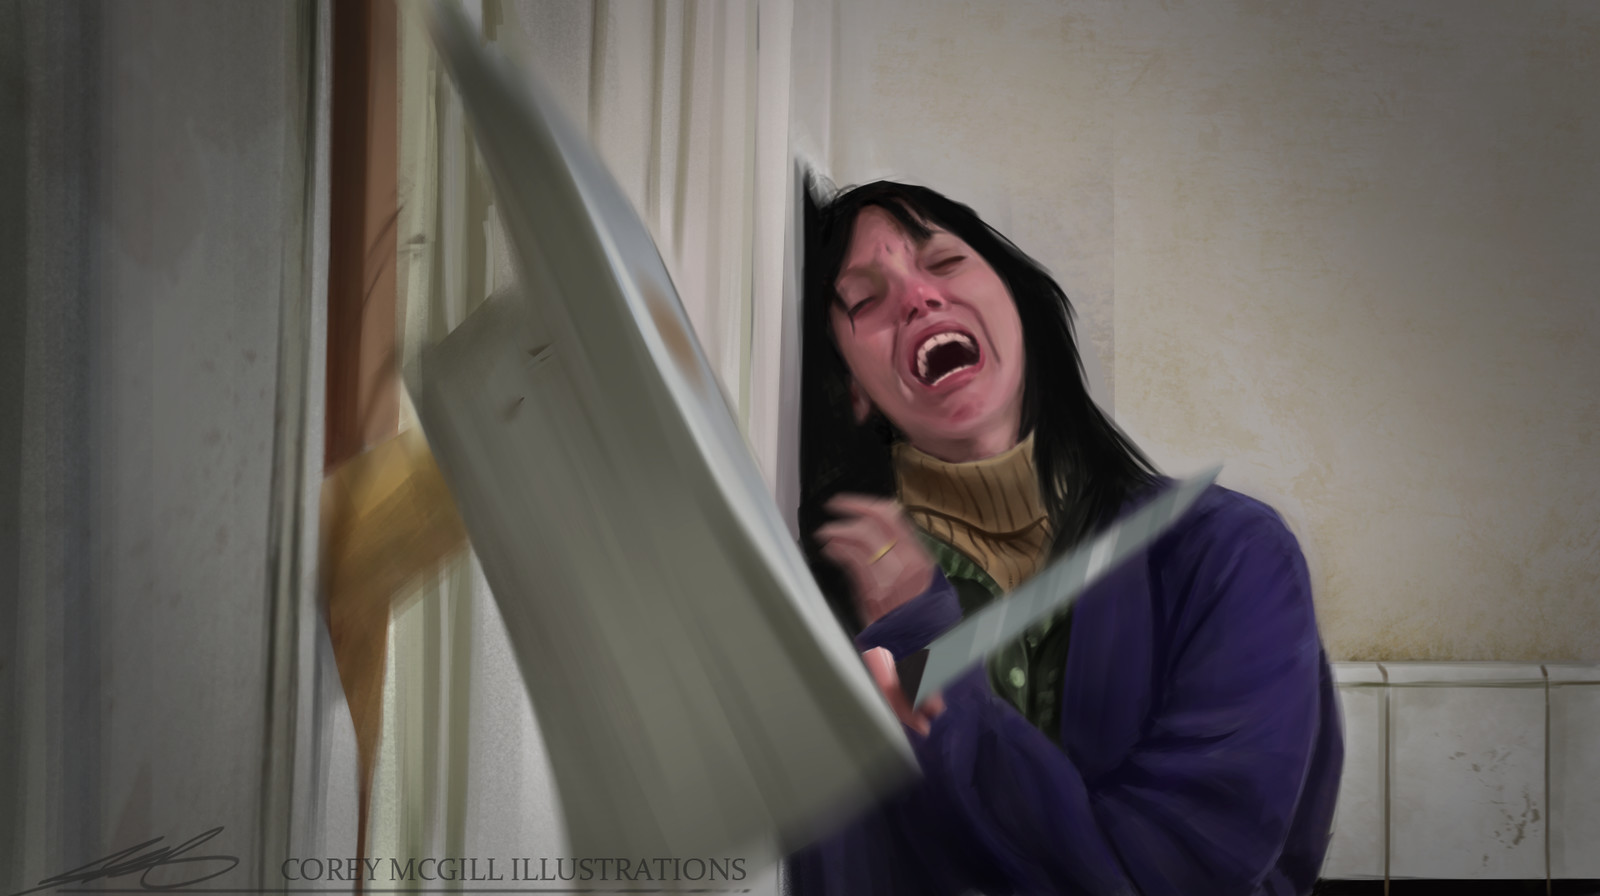 Color/Value Study 3 - The Shining